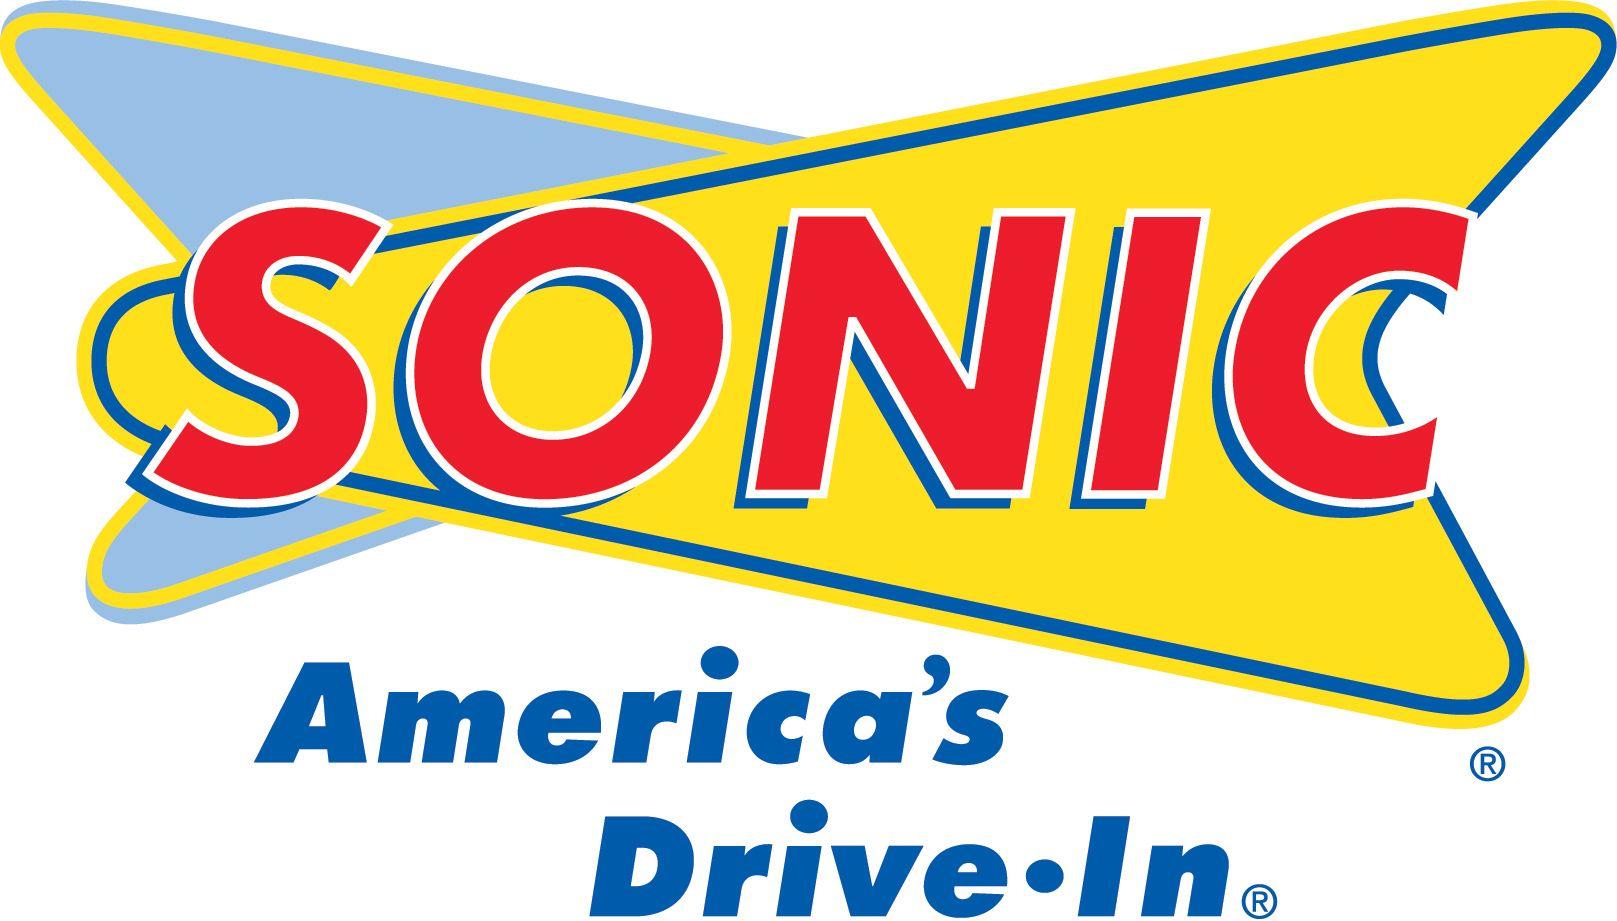 Blue and Yellow Restaurant Logo - SONIC Drive-In, One of America's Largest Restaurant Brands, Aims to ...